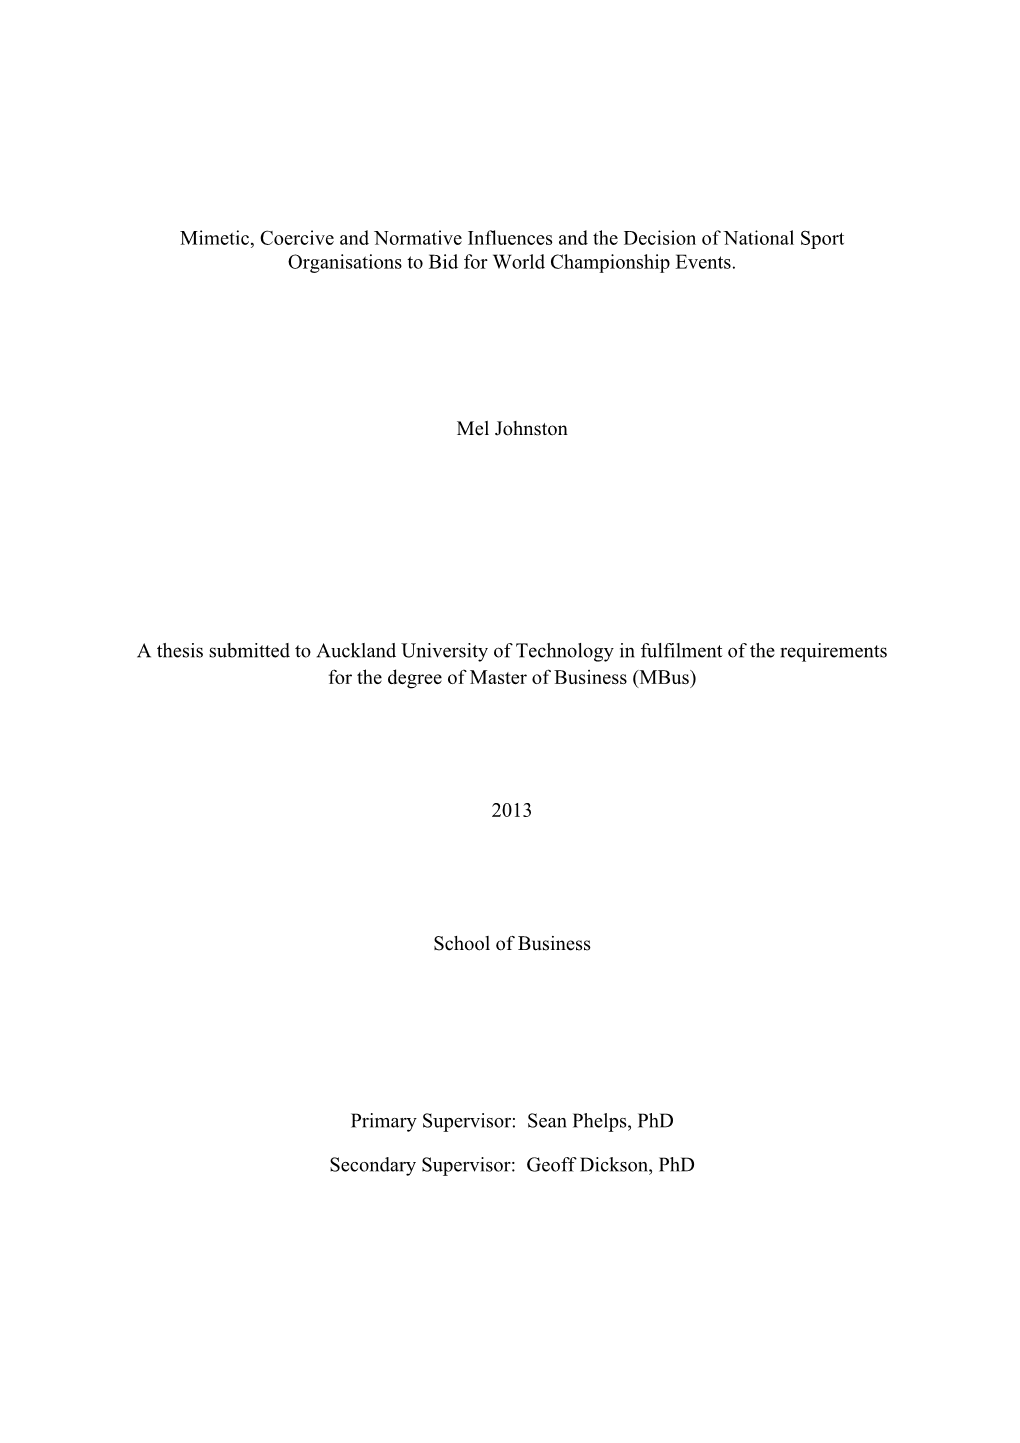 Mimetic, Coercive and Normative Influences and the Decision of National Sport Organisations to Bid for World Championship Events